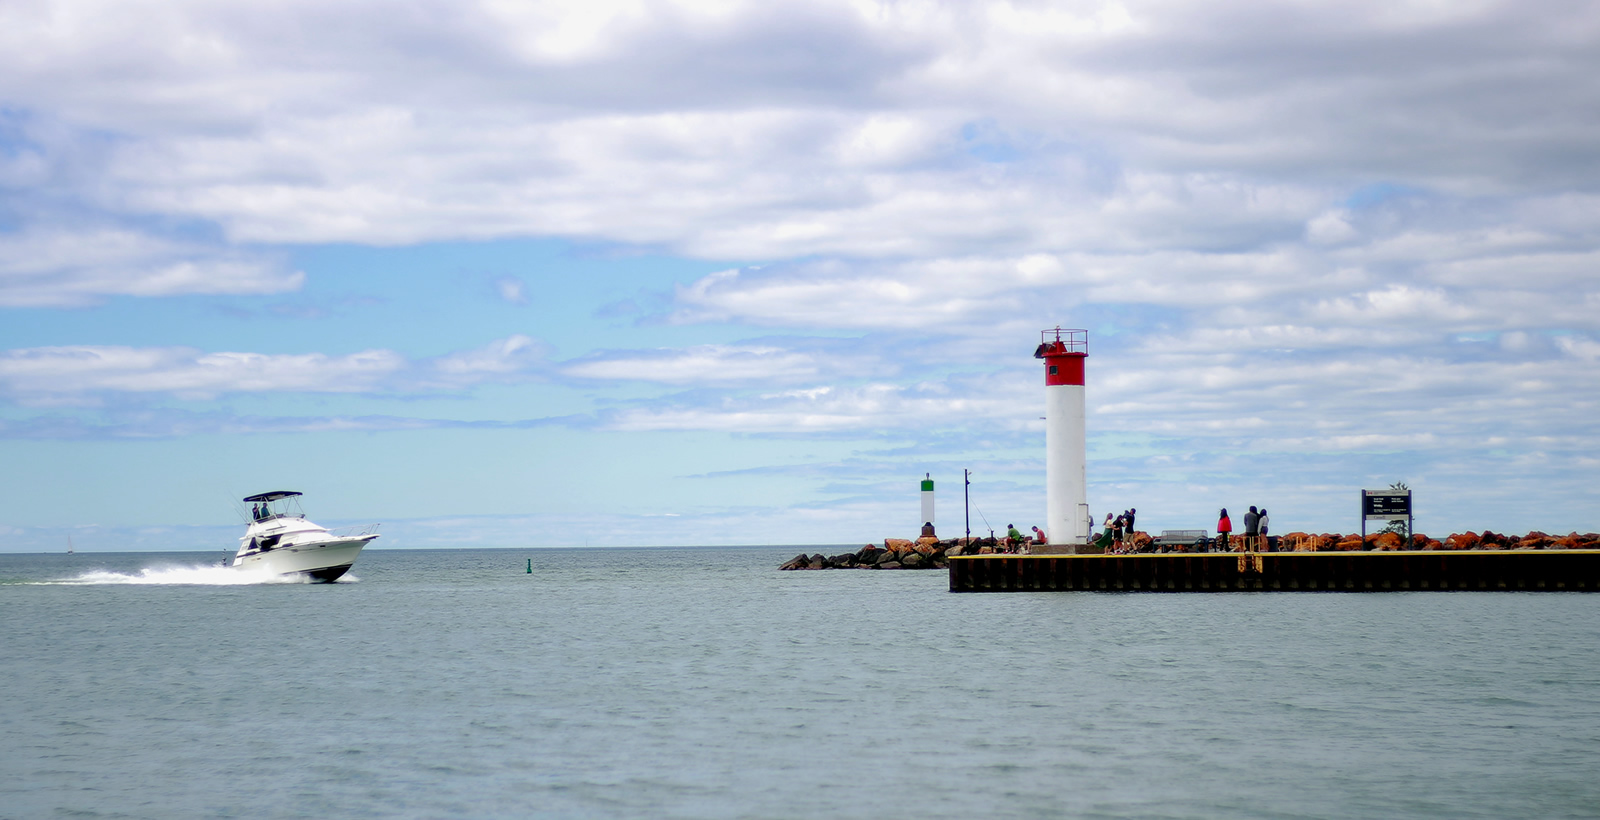 A picture of a boat on Lake Ontario moving towards a pier which has a red lighthouse and people on it on a bright summer day.